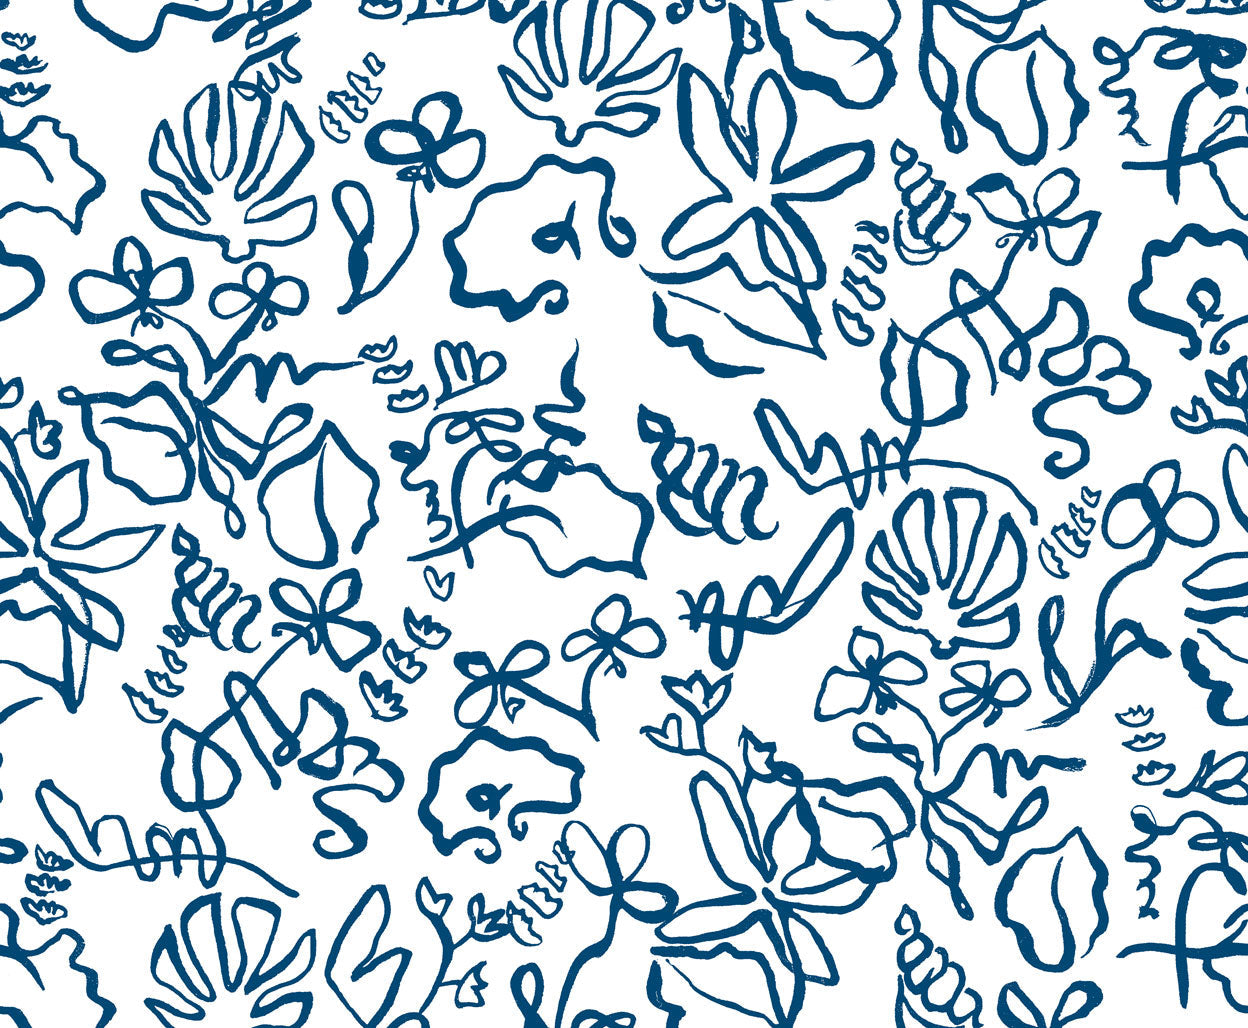 Detail of wallpaper in a painterly seashell print in navy on a white field.